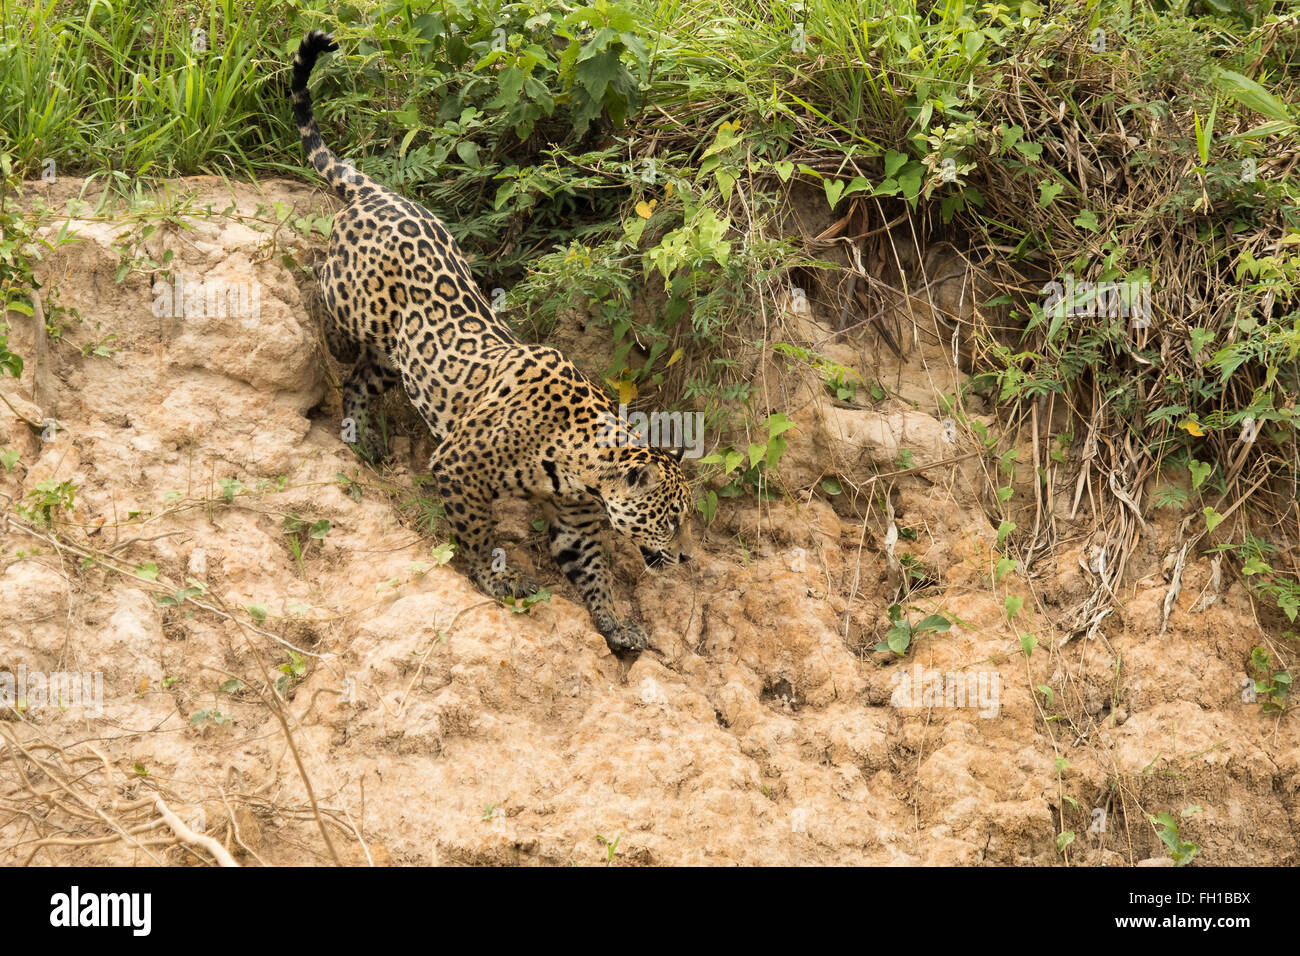 A wild sub-adult female jaguar descending a bank of the Cuiaba river in the Pantanal, Brazil. Stock Photo